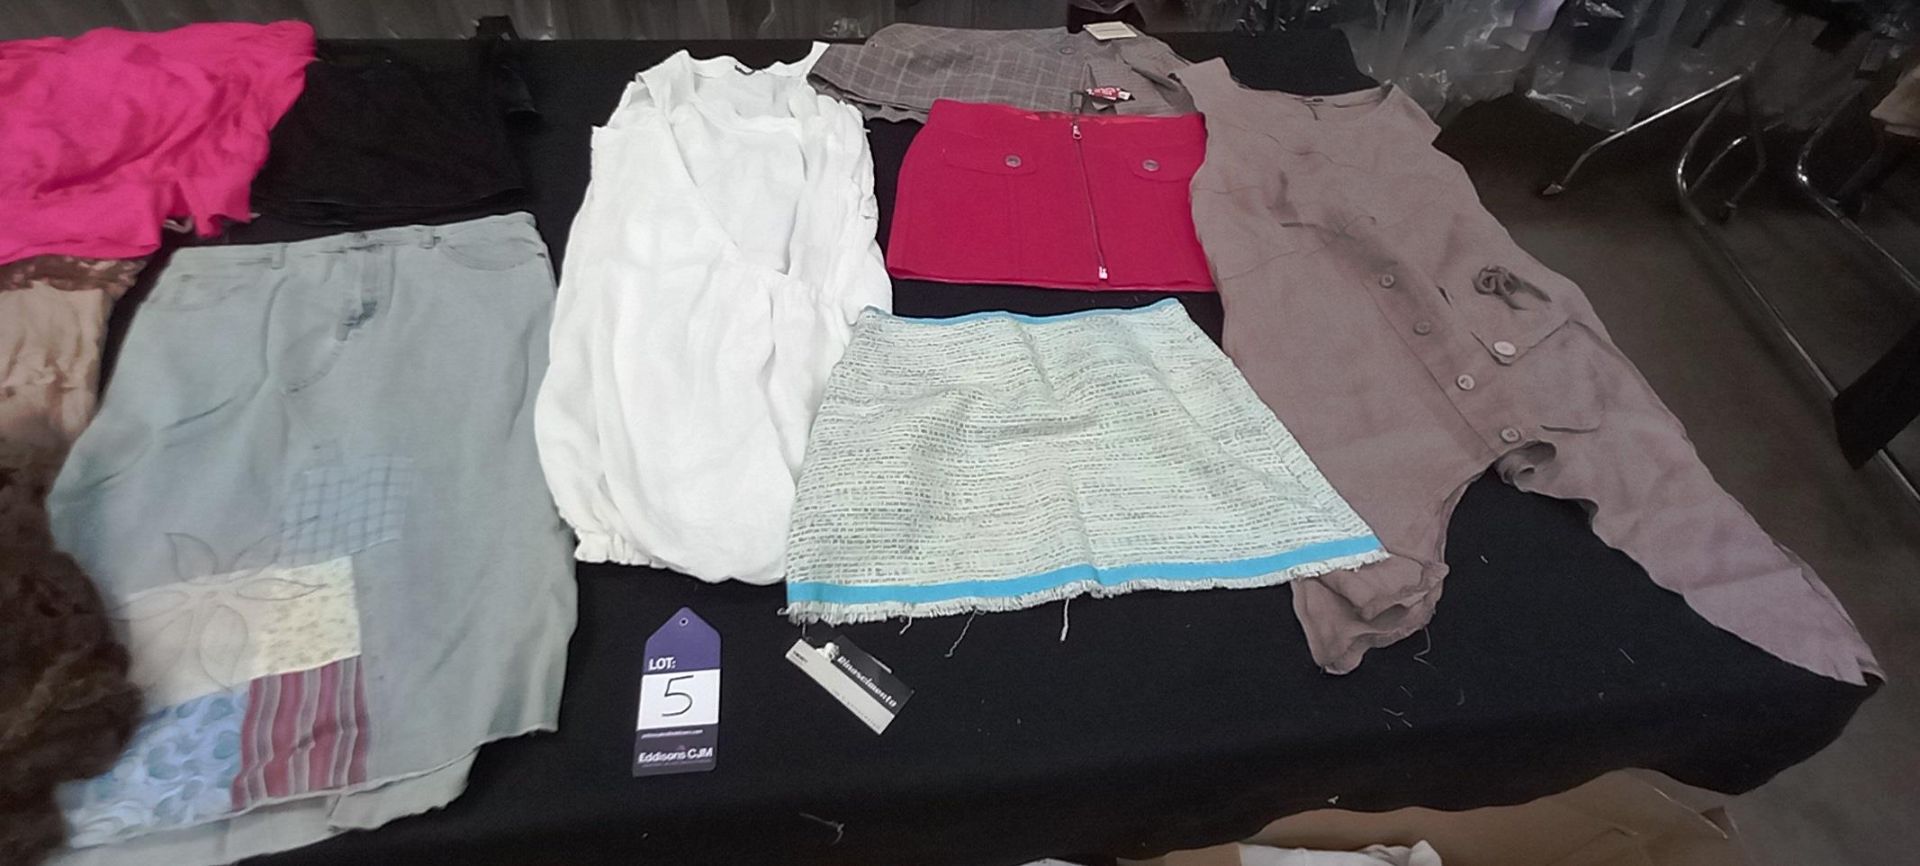 Large Quantity of Various Designer Ladies Clothes to Include Dresses, Tops and Skirts. Size 6 -14 - Image 5 of 5